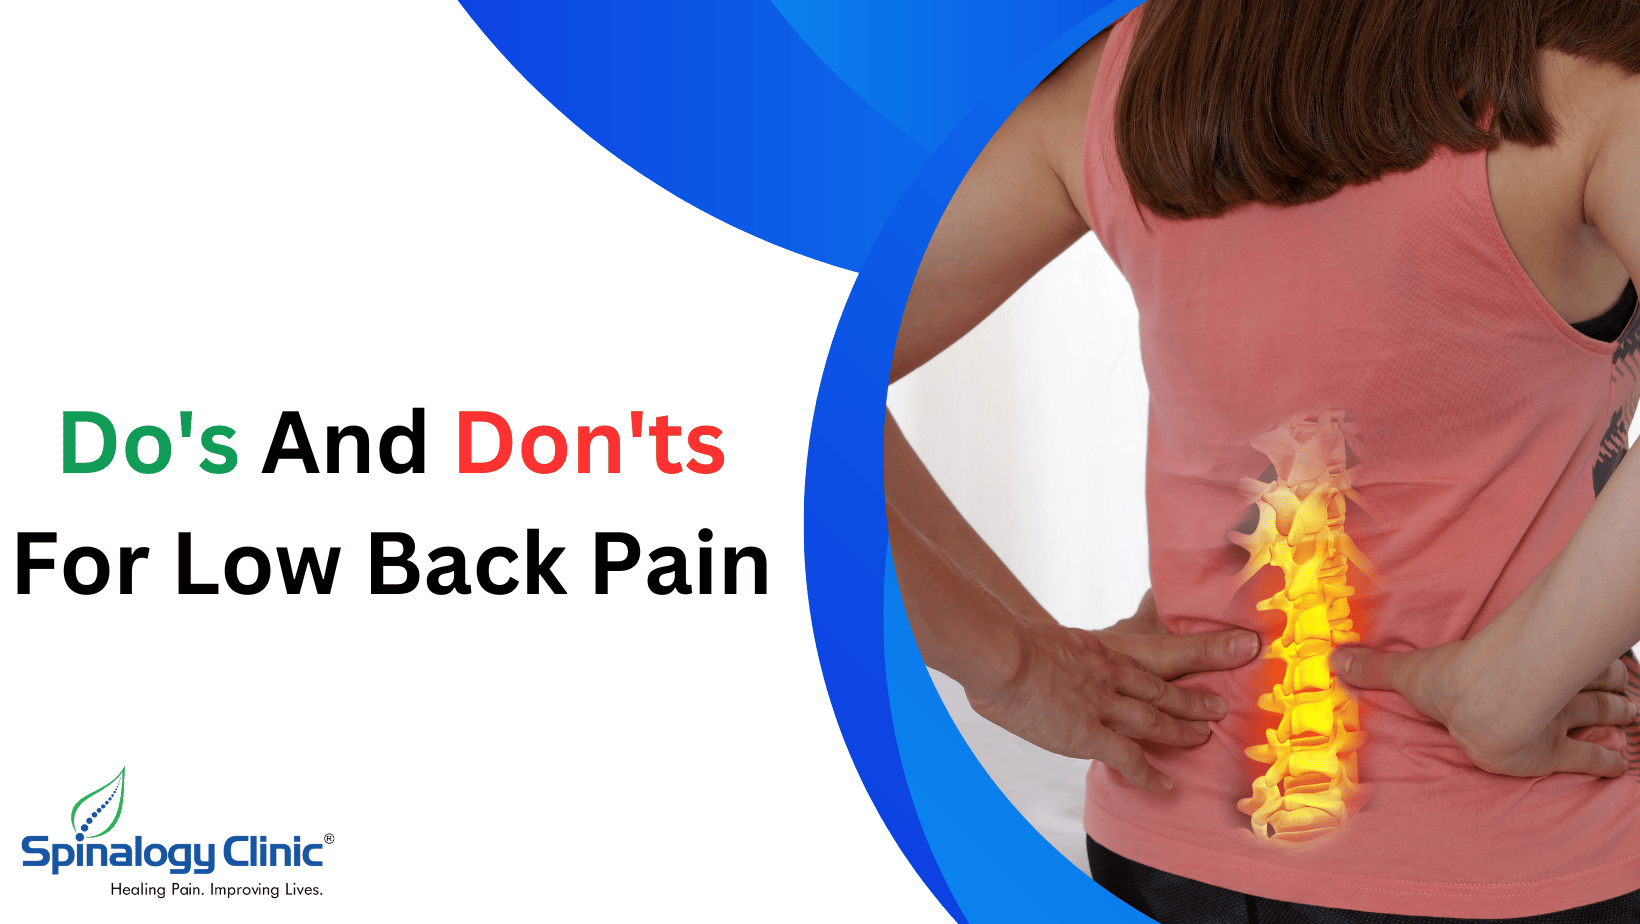 Do’s And Don’ts For Lower Back Pain